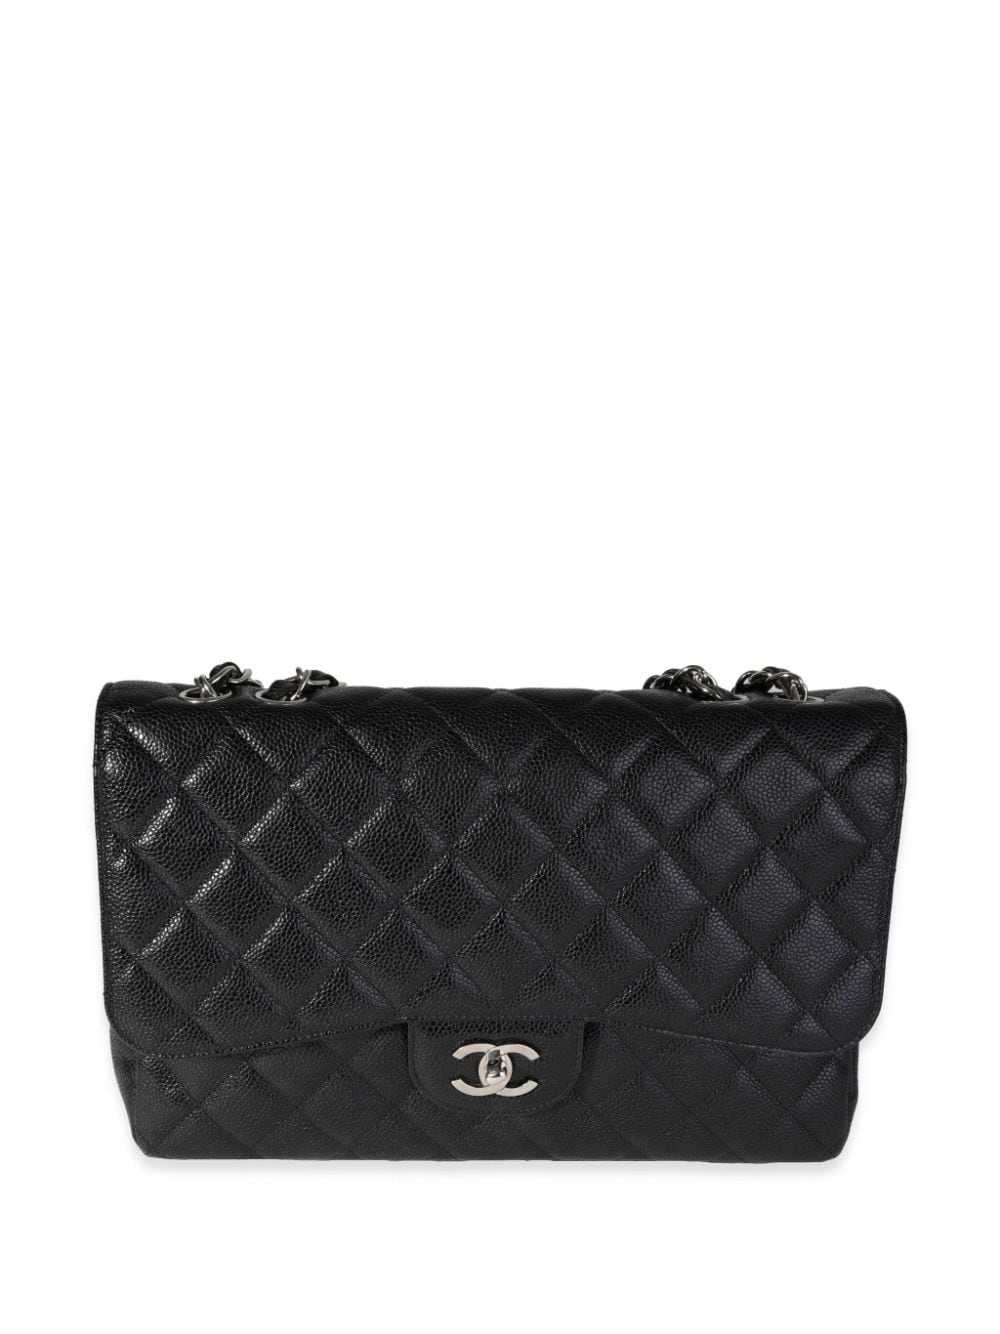 2008 Chanel Classic Jumbo Quilted Patent Leather Rare Olive Green Handbag Purse